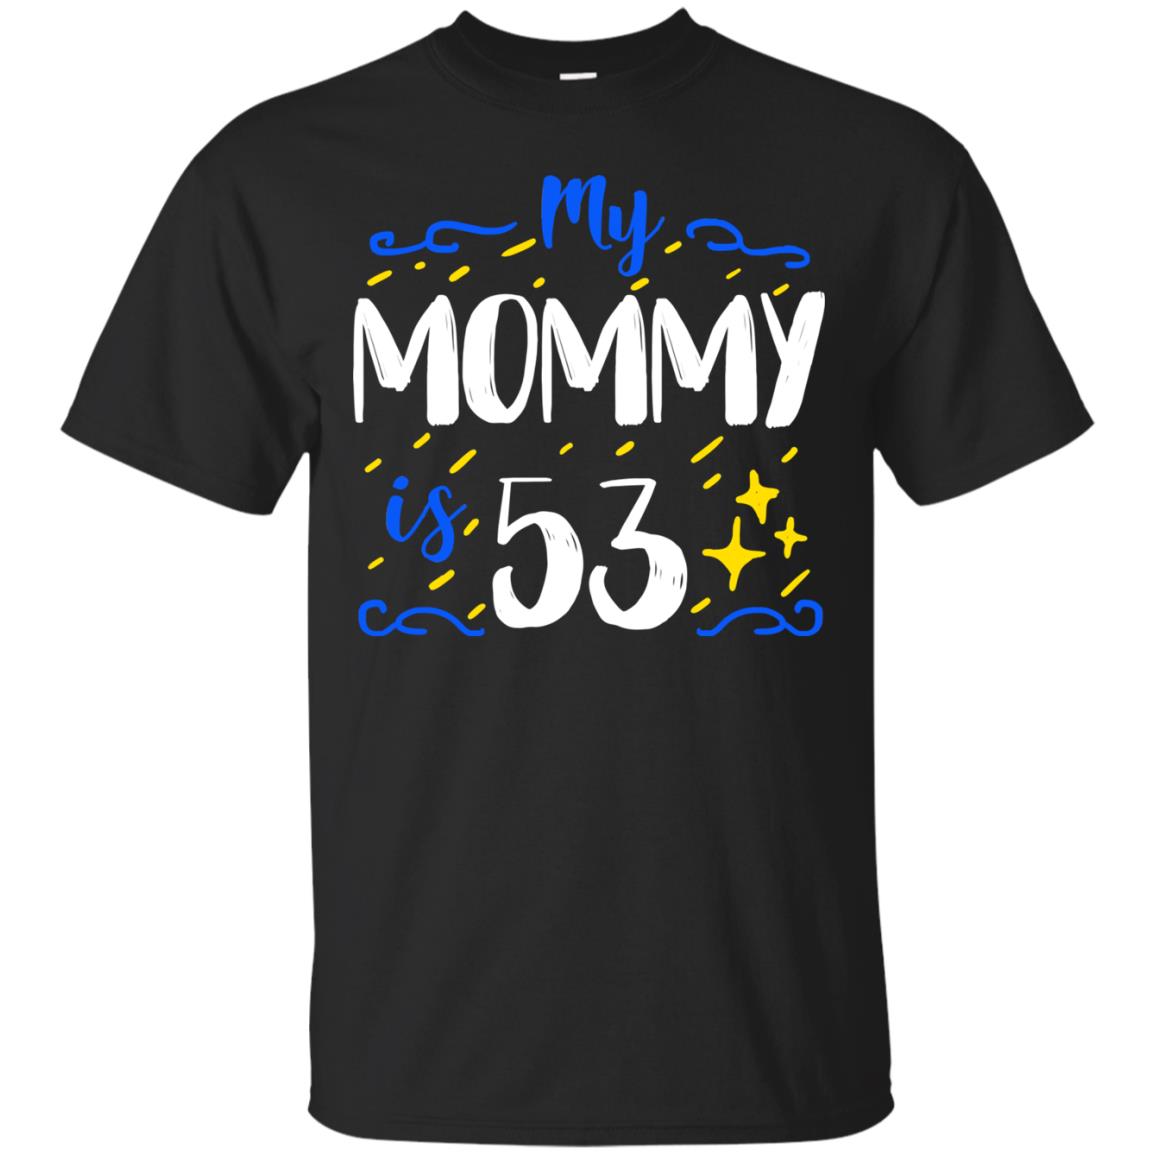 My Mommy Is 53 53rd Birthday Mommy Shirt For Sons Or DaughtersG200 Gildan Ultra Cotton T-Shirt